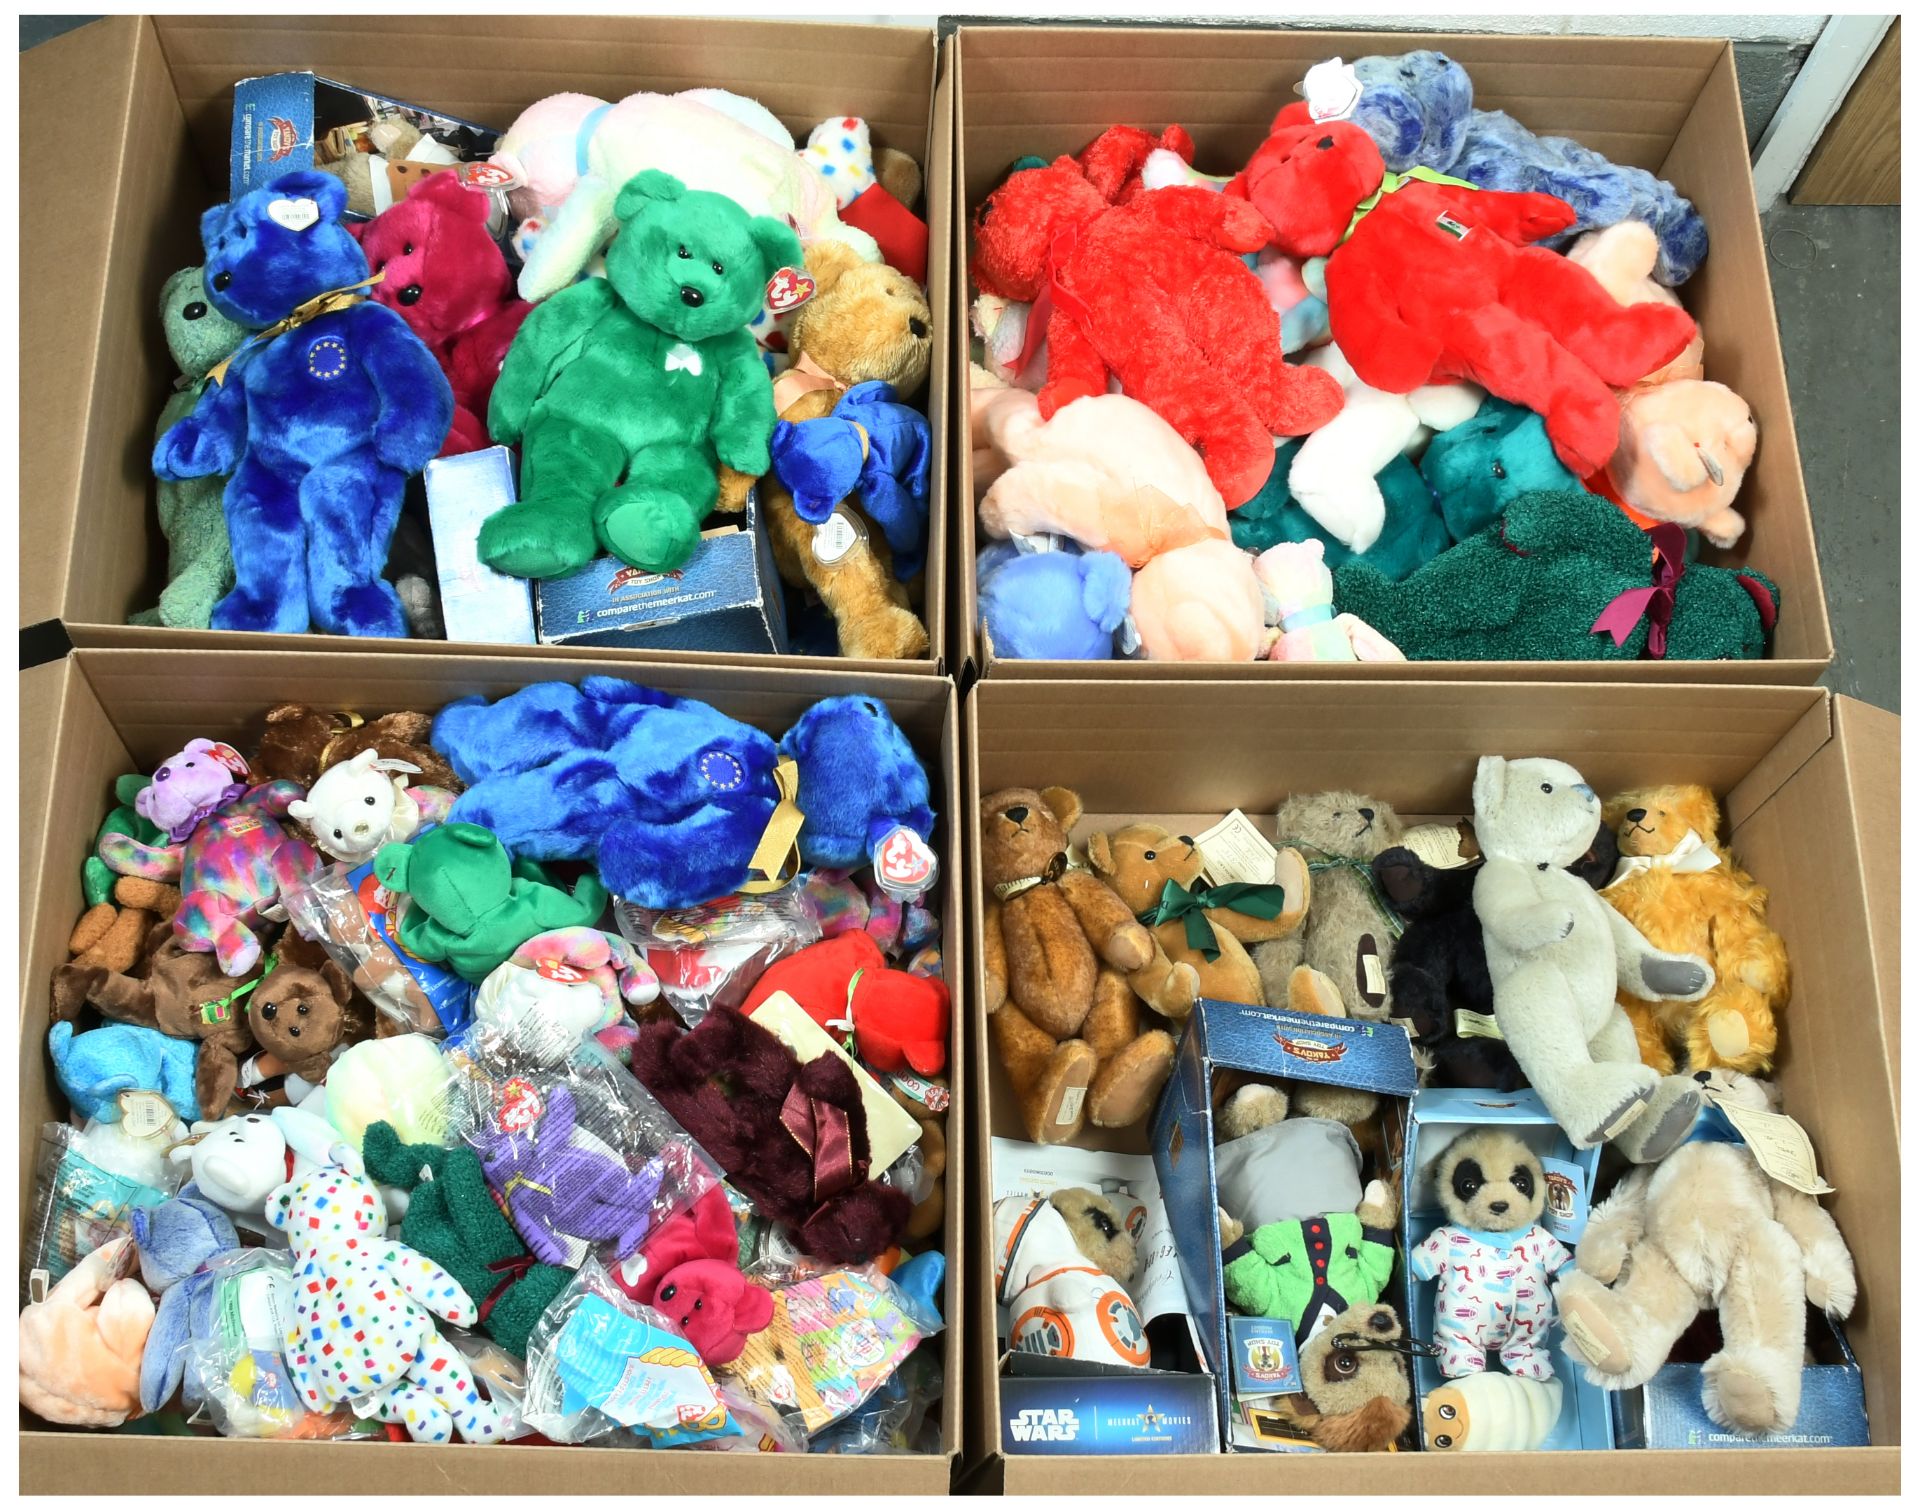 Large collection of teddy bears, including Dean's Rag Book and TY Beanie Babies